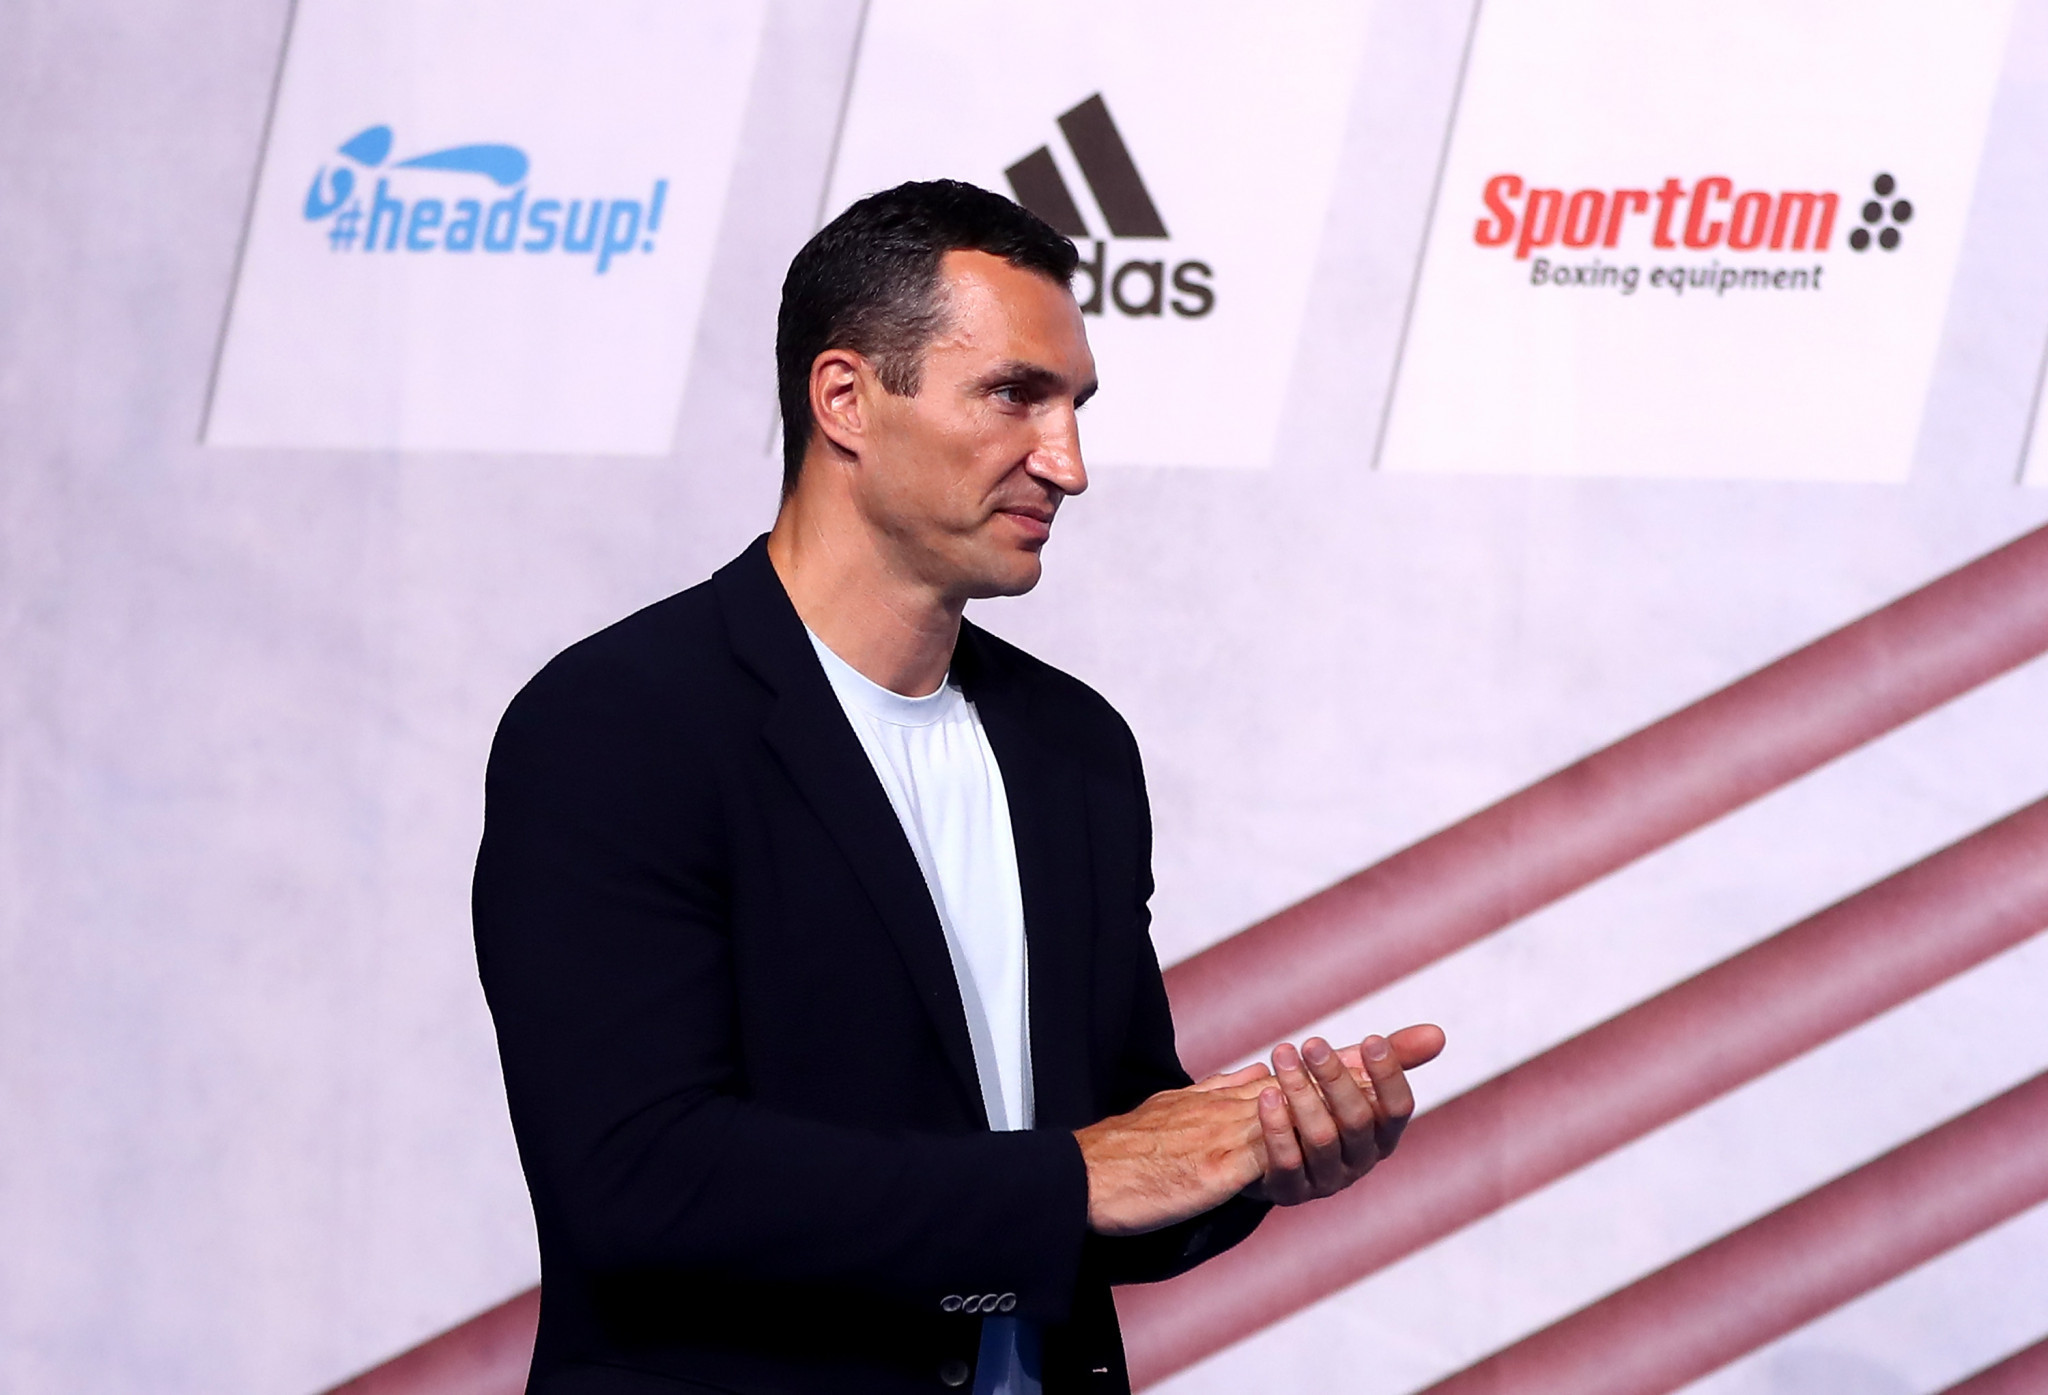 It remains possible that former world heavyweight champion Wladimir Klitschko could be involved in the Olympic boxing event at Tokyo 2020 ©Getty Images